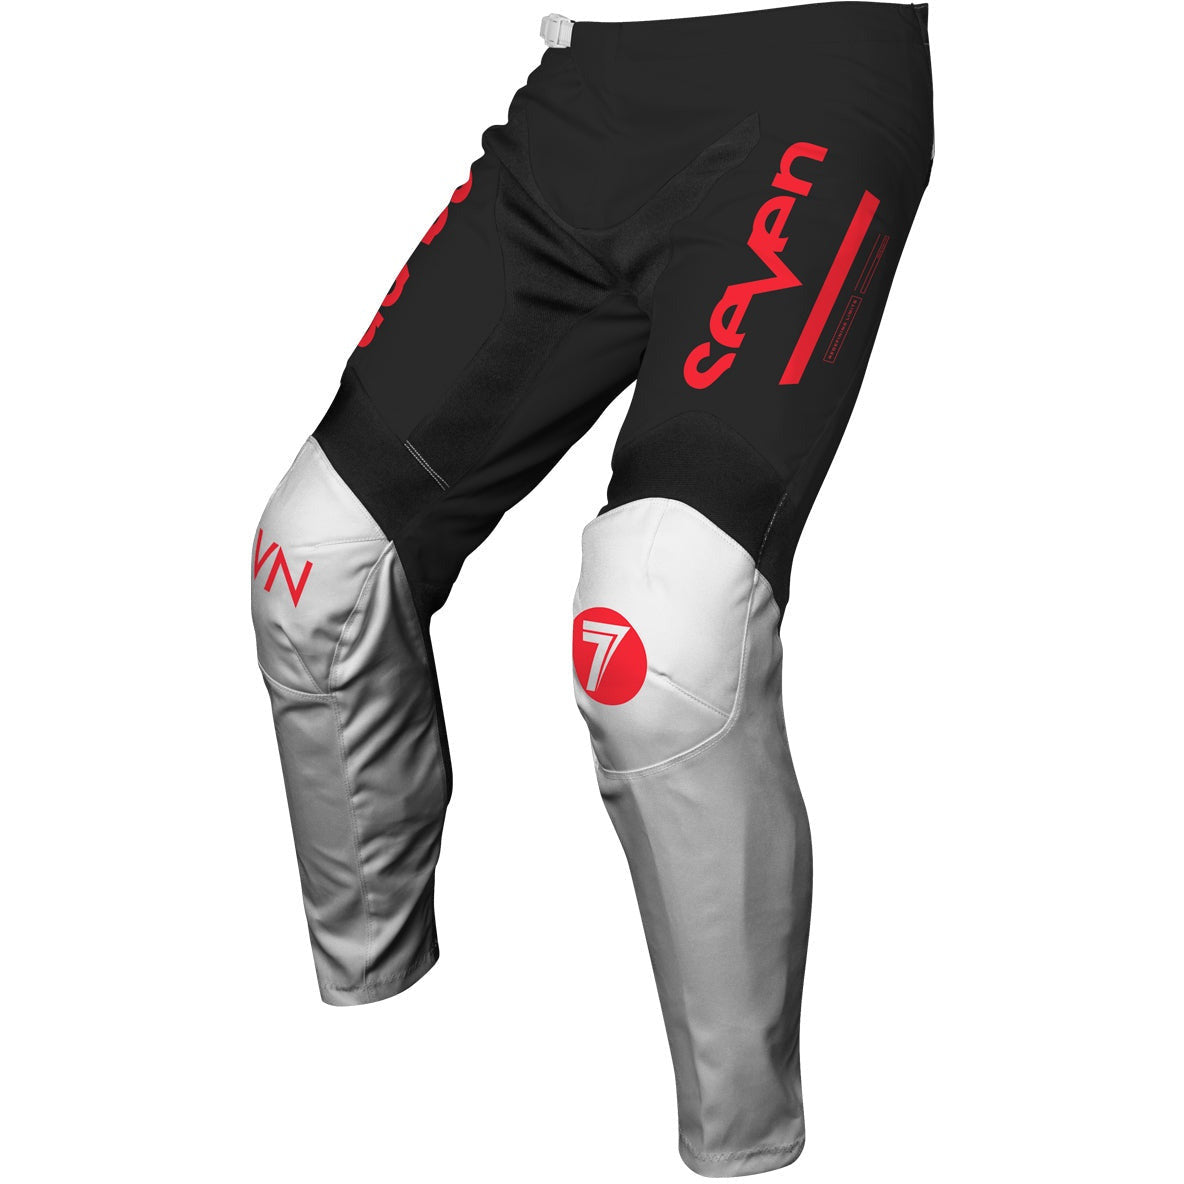 SEVEN-YOUTH-VOX-PHASER-PANT - Riding Gear - Synik Clothing - synikclothing.com